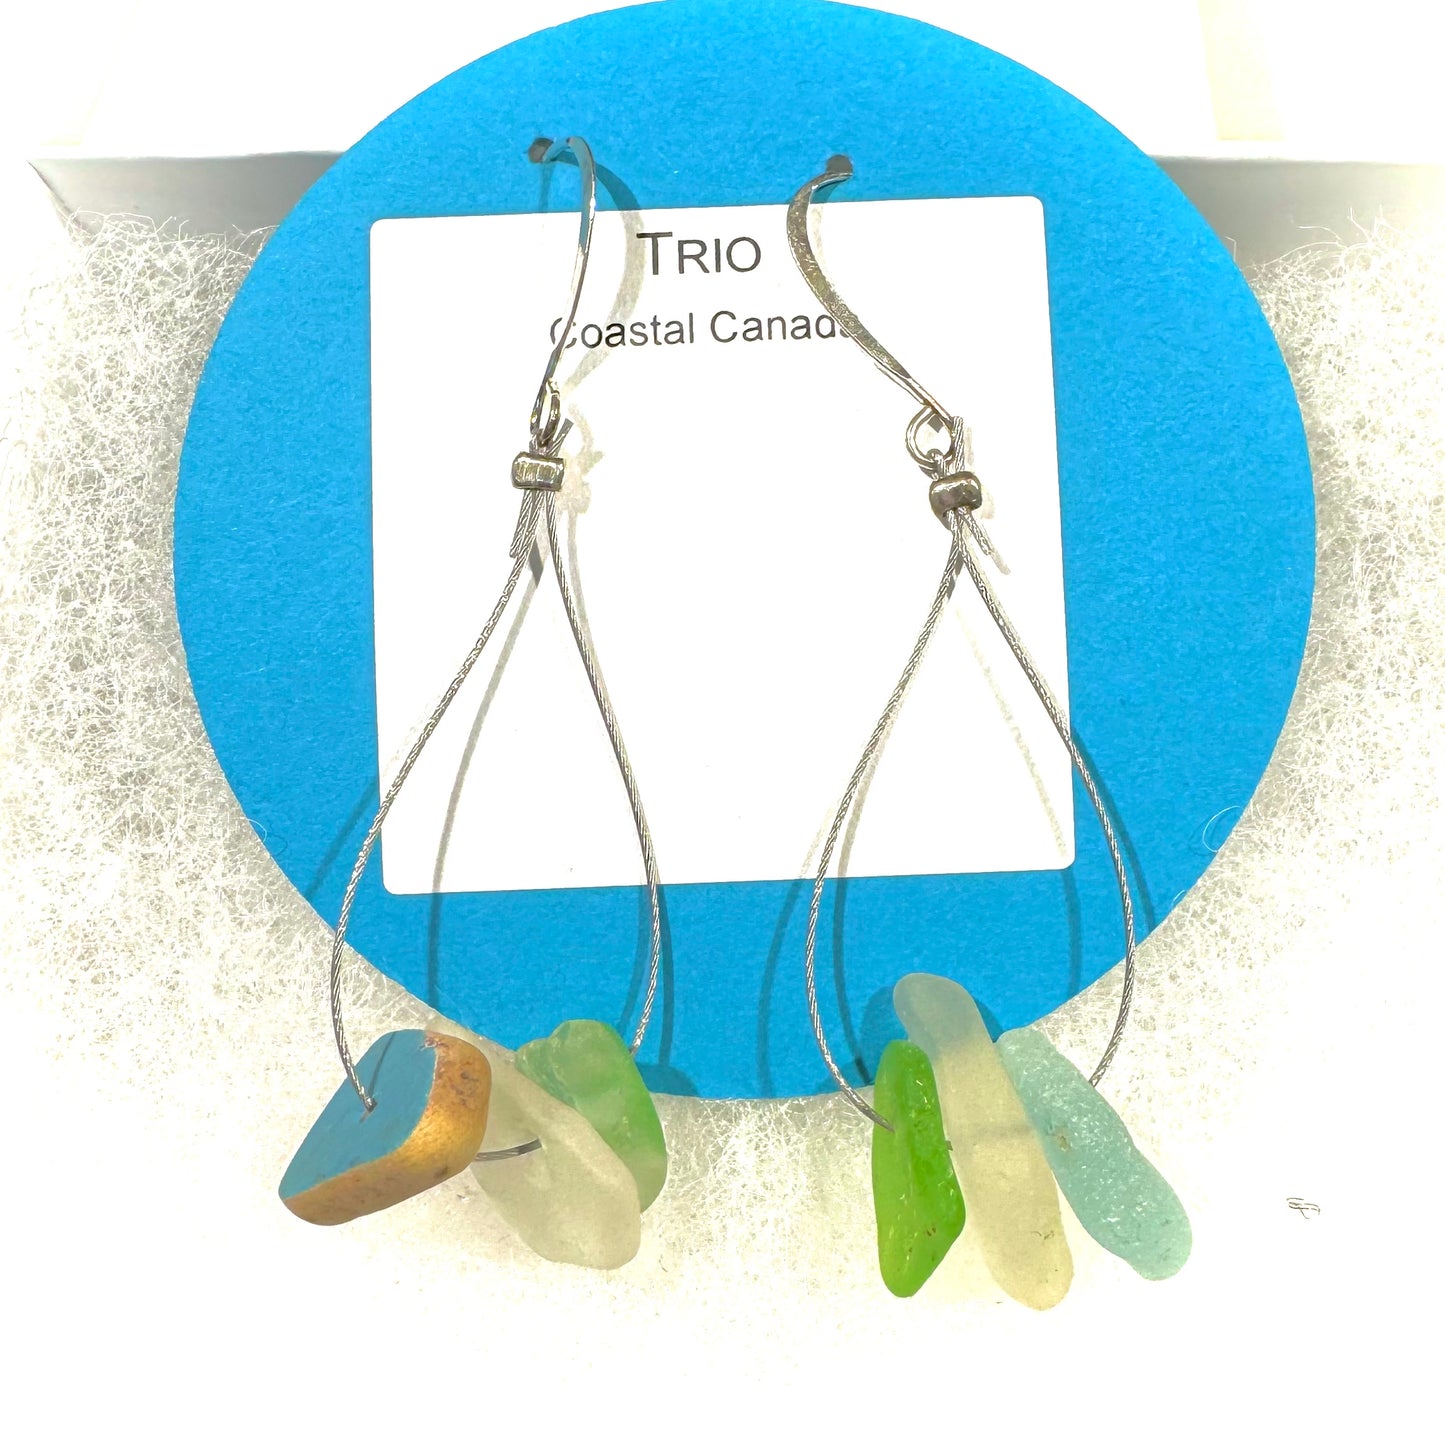 Trio Earrings - Sea glass and pottery shards in green, aqua, white, and blue from coastal Canadaoallergenic nickle-free hook